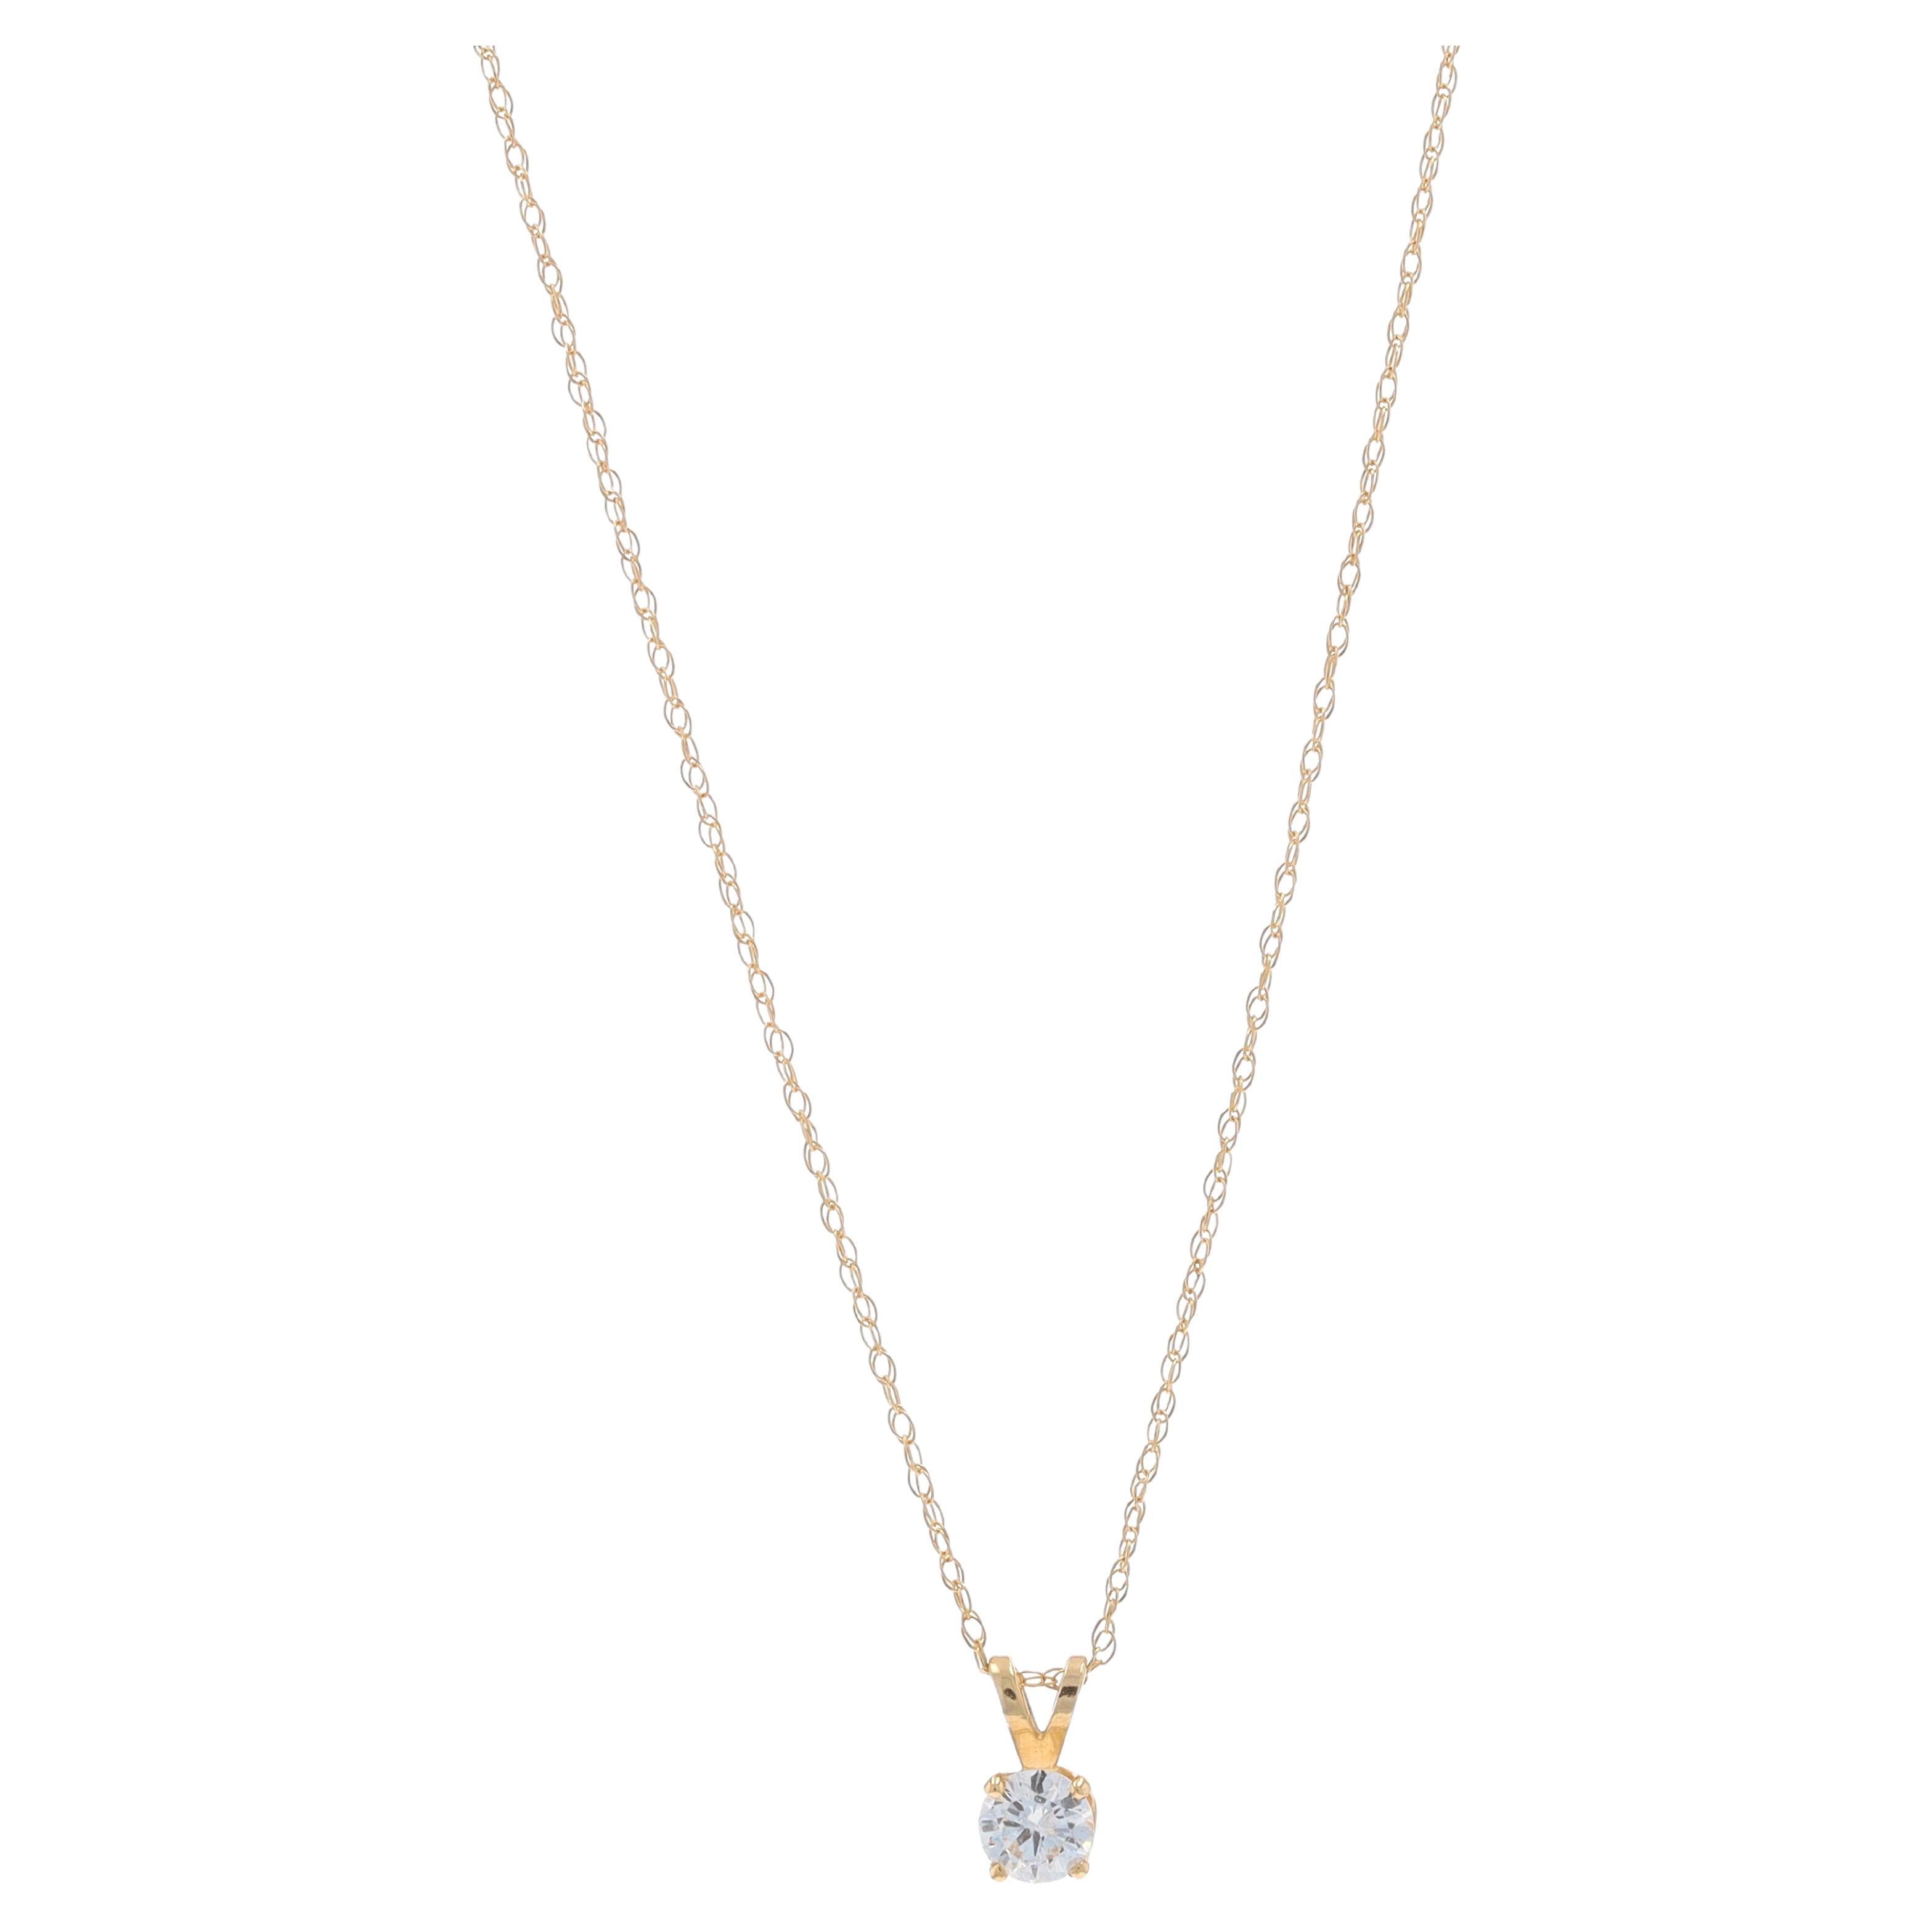 Yellow Gold Diamond Solitaire Pendant Necklace 18 1/4" - 14k Round .33ct